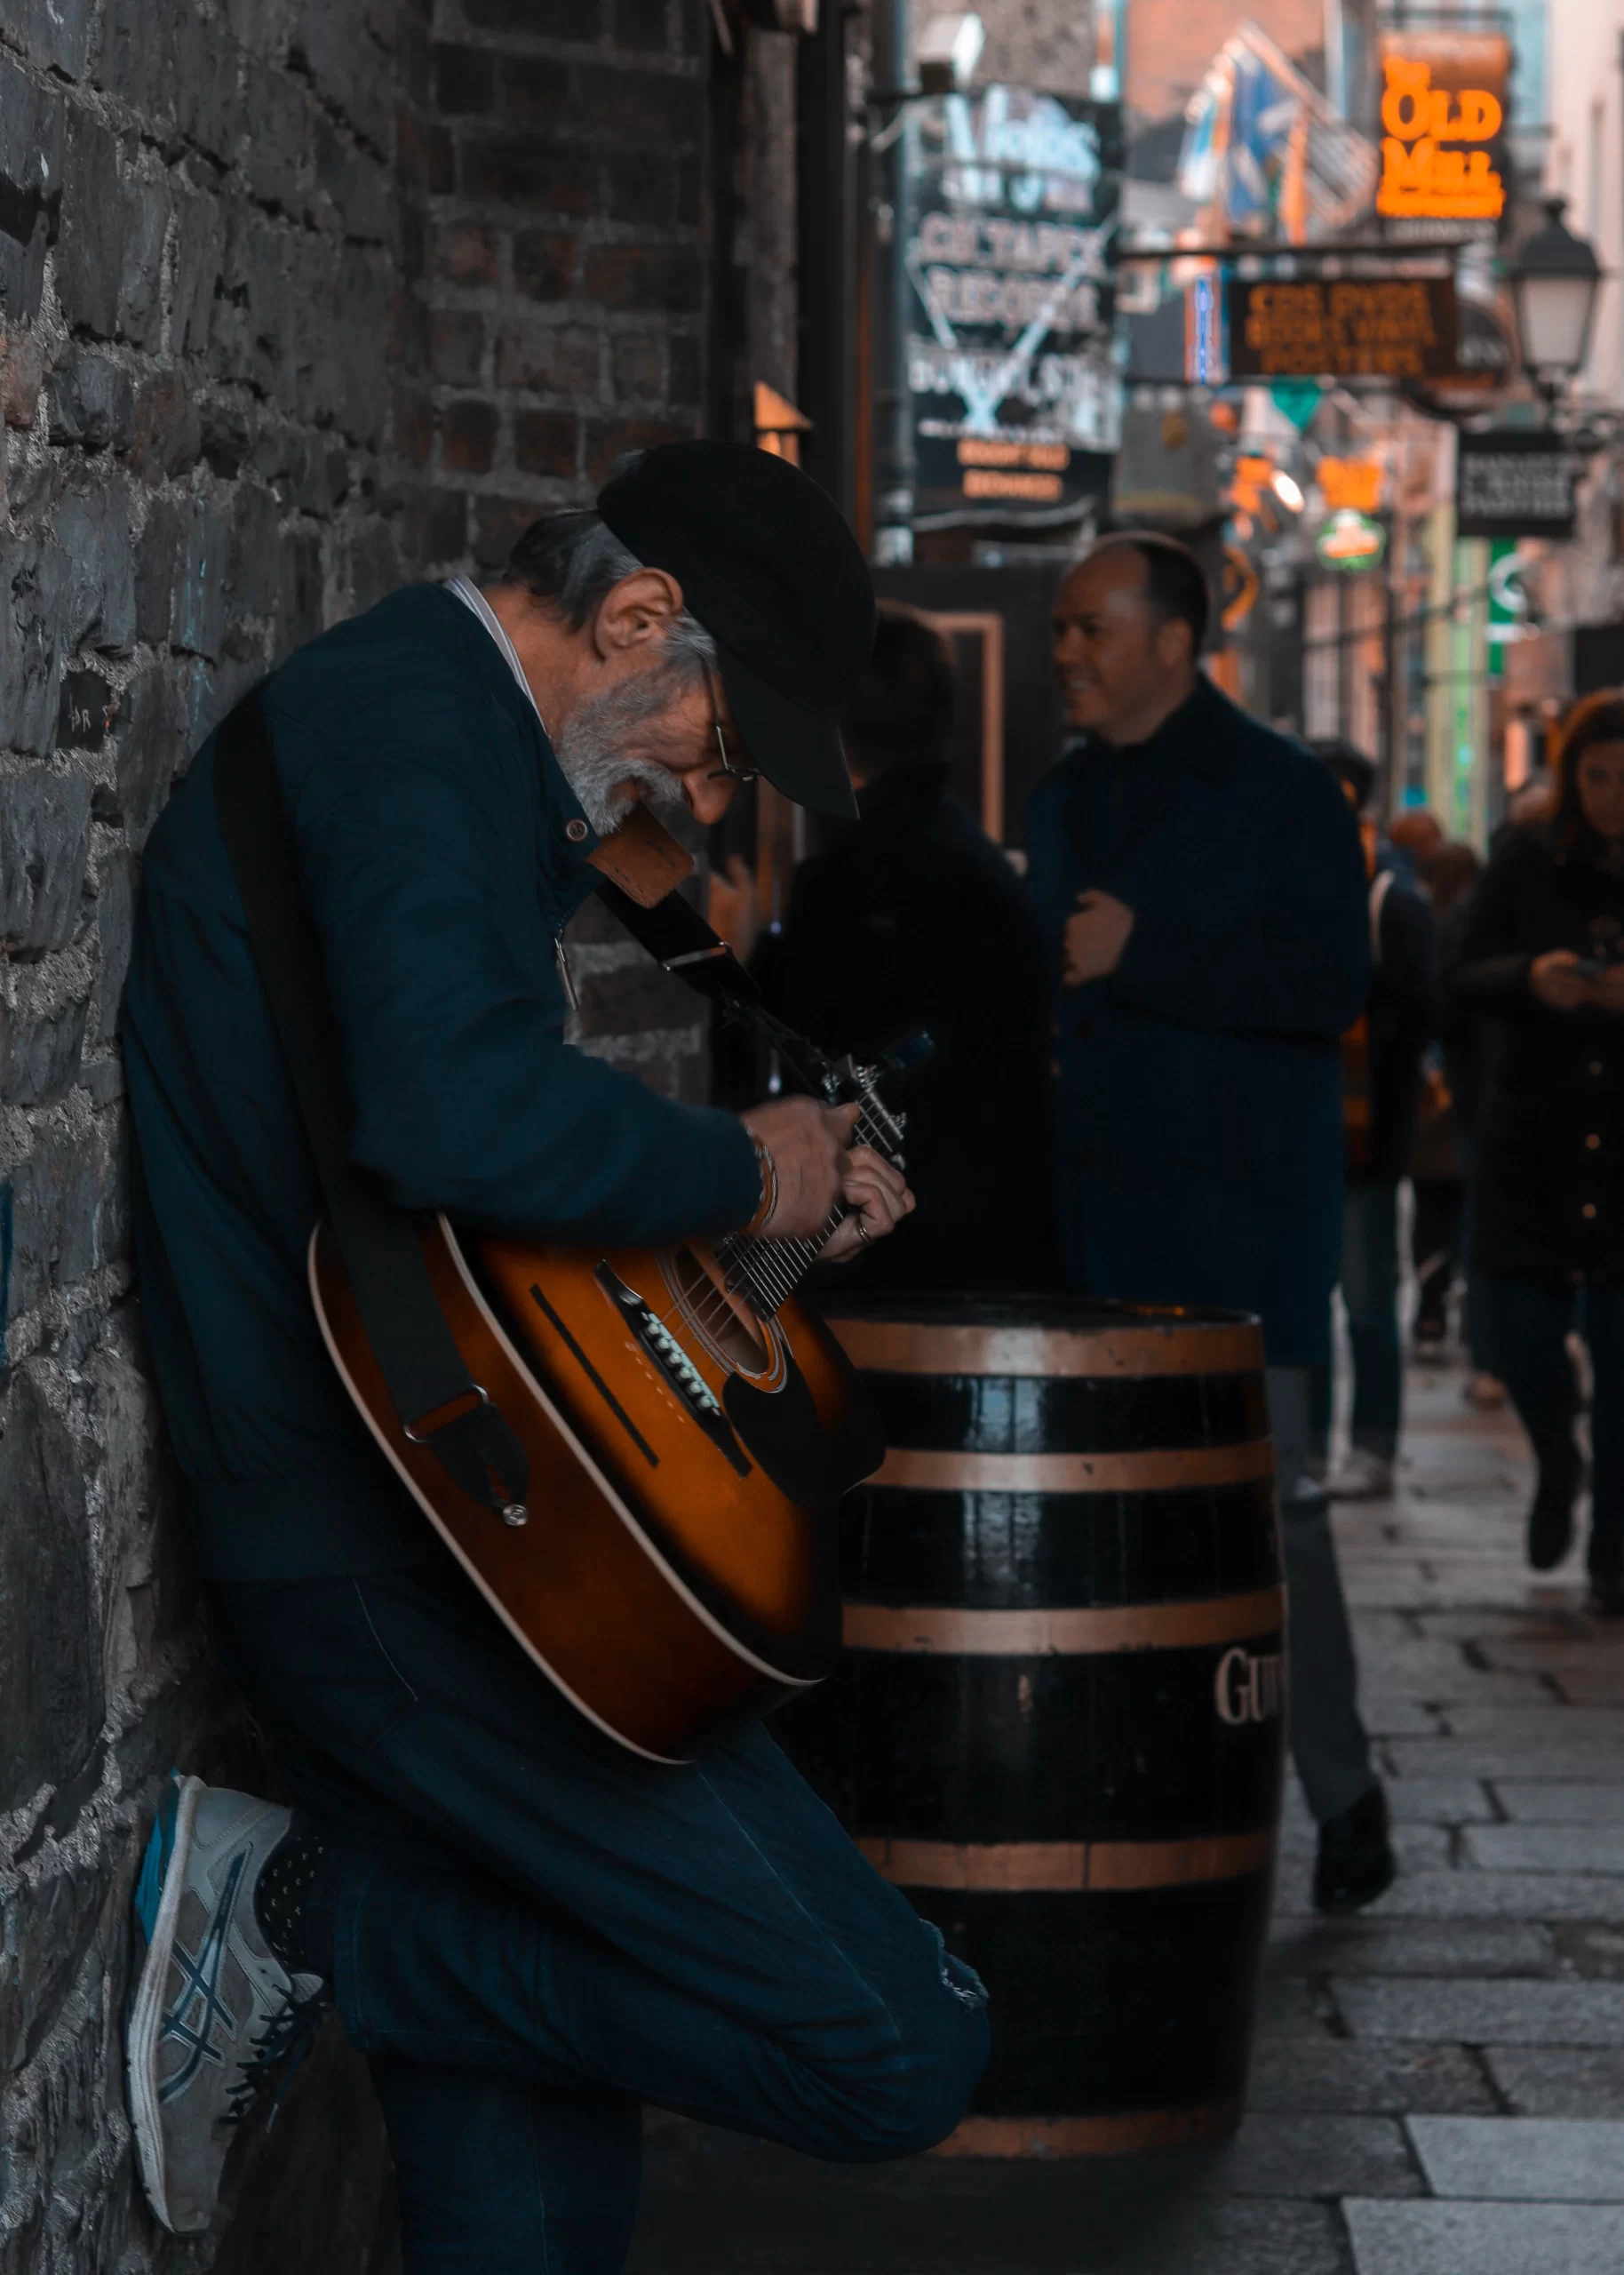 ordan-harrison-Merchant's Arch, Temple Bar, Dublin, Ireland Published on April 10, 2019 Canon, EOS 200D Free to use under the Unsplash License Man busking at Merchant's Arch, Temple Bar, Dublin.-unsplash